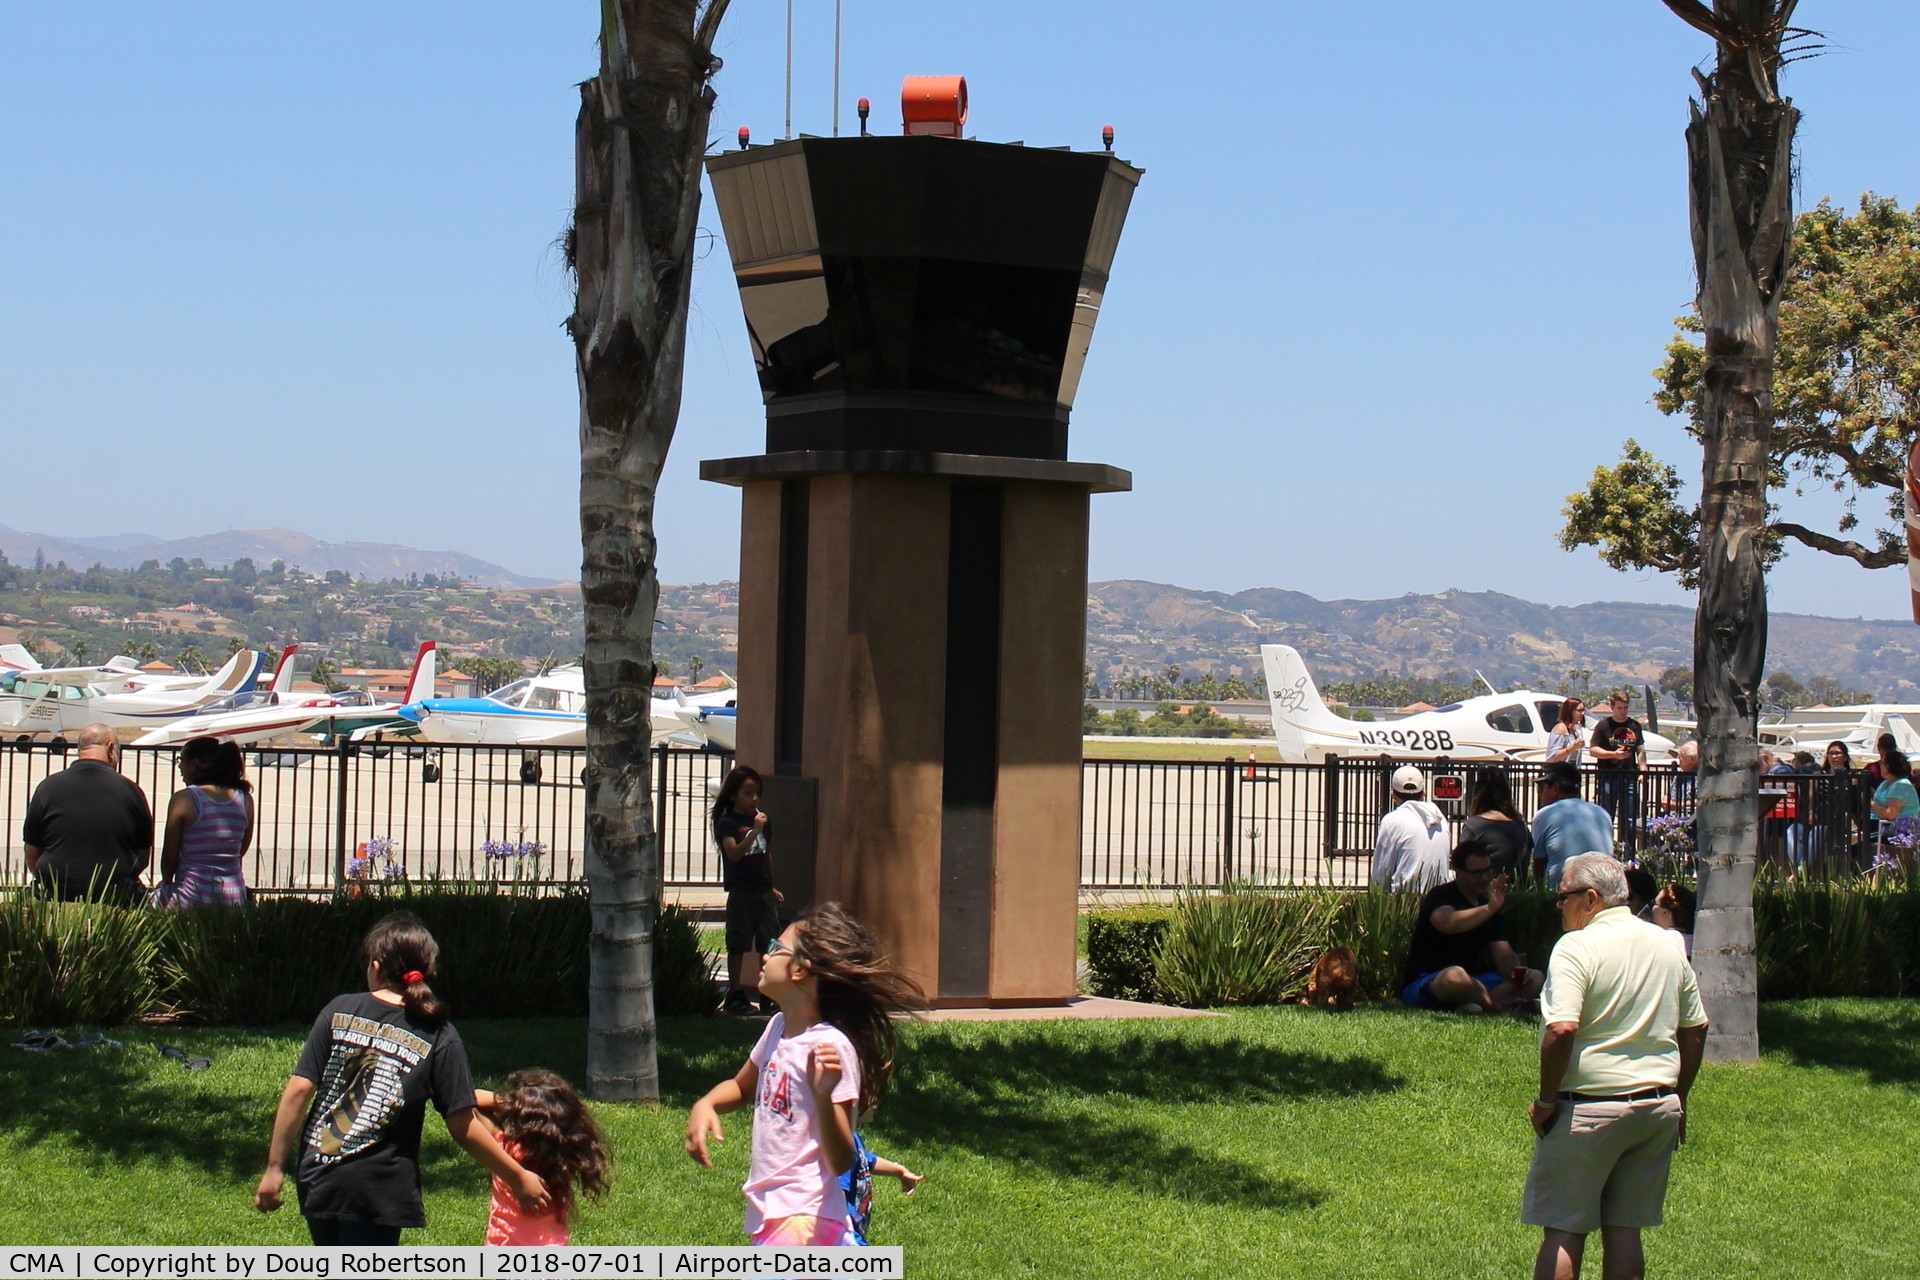 Camarillo Airport (CMA) - Camarillo Airport View Park behind the Waypoint Restaurant with miniature Control Tower and live audio from aircraft and CMA Tower with rotating beacon. Quite the attraction!